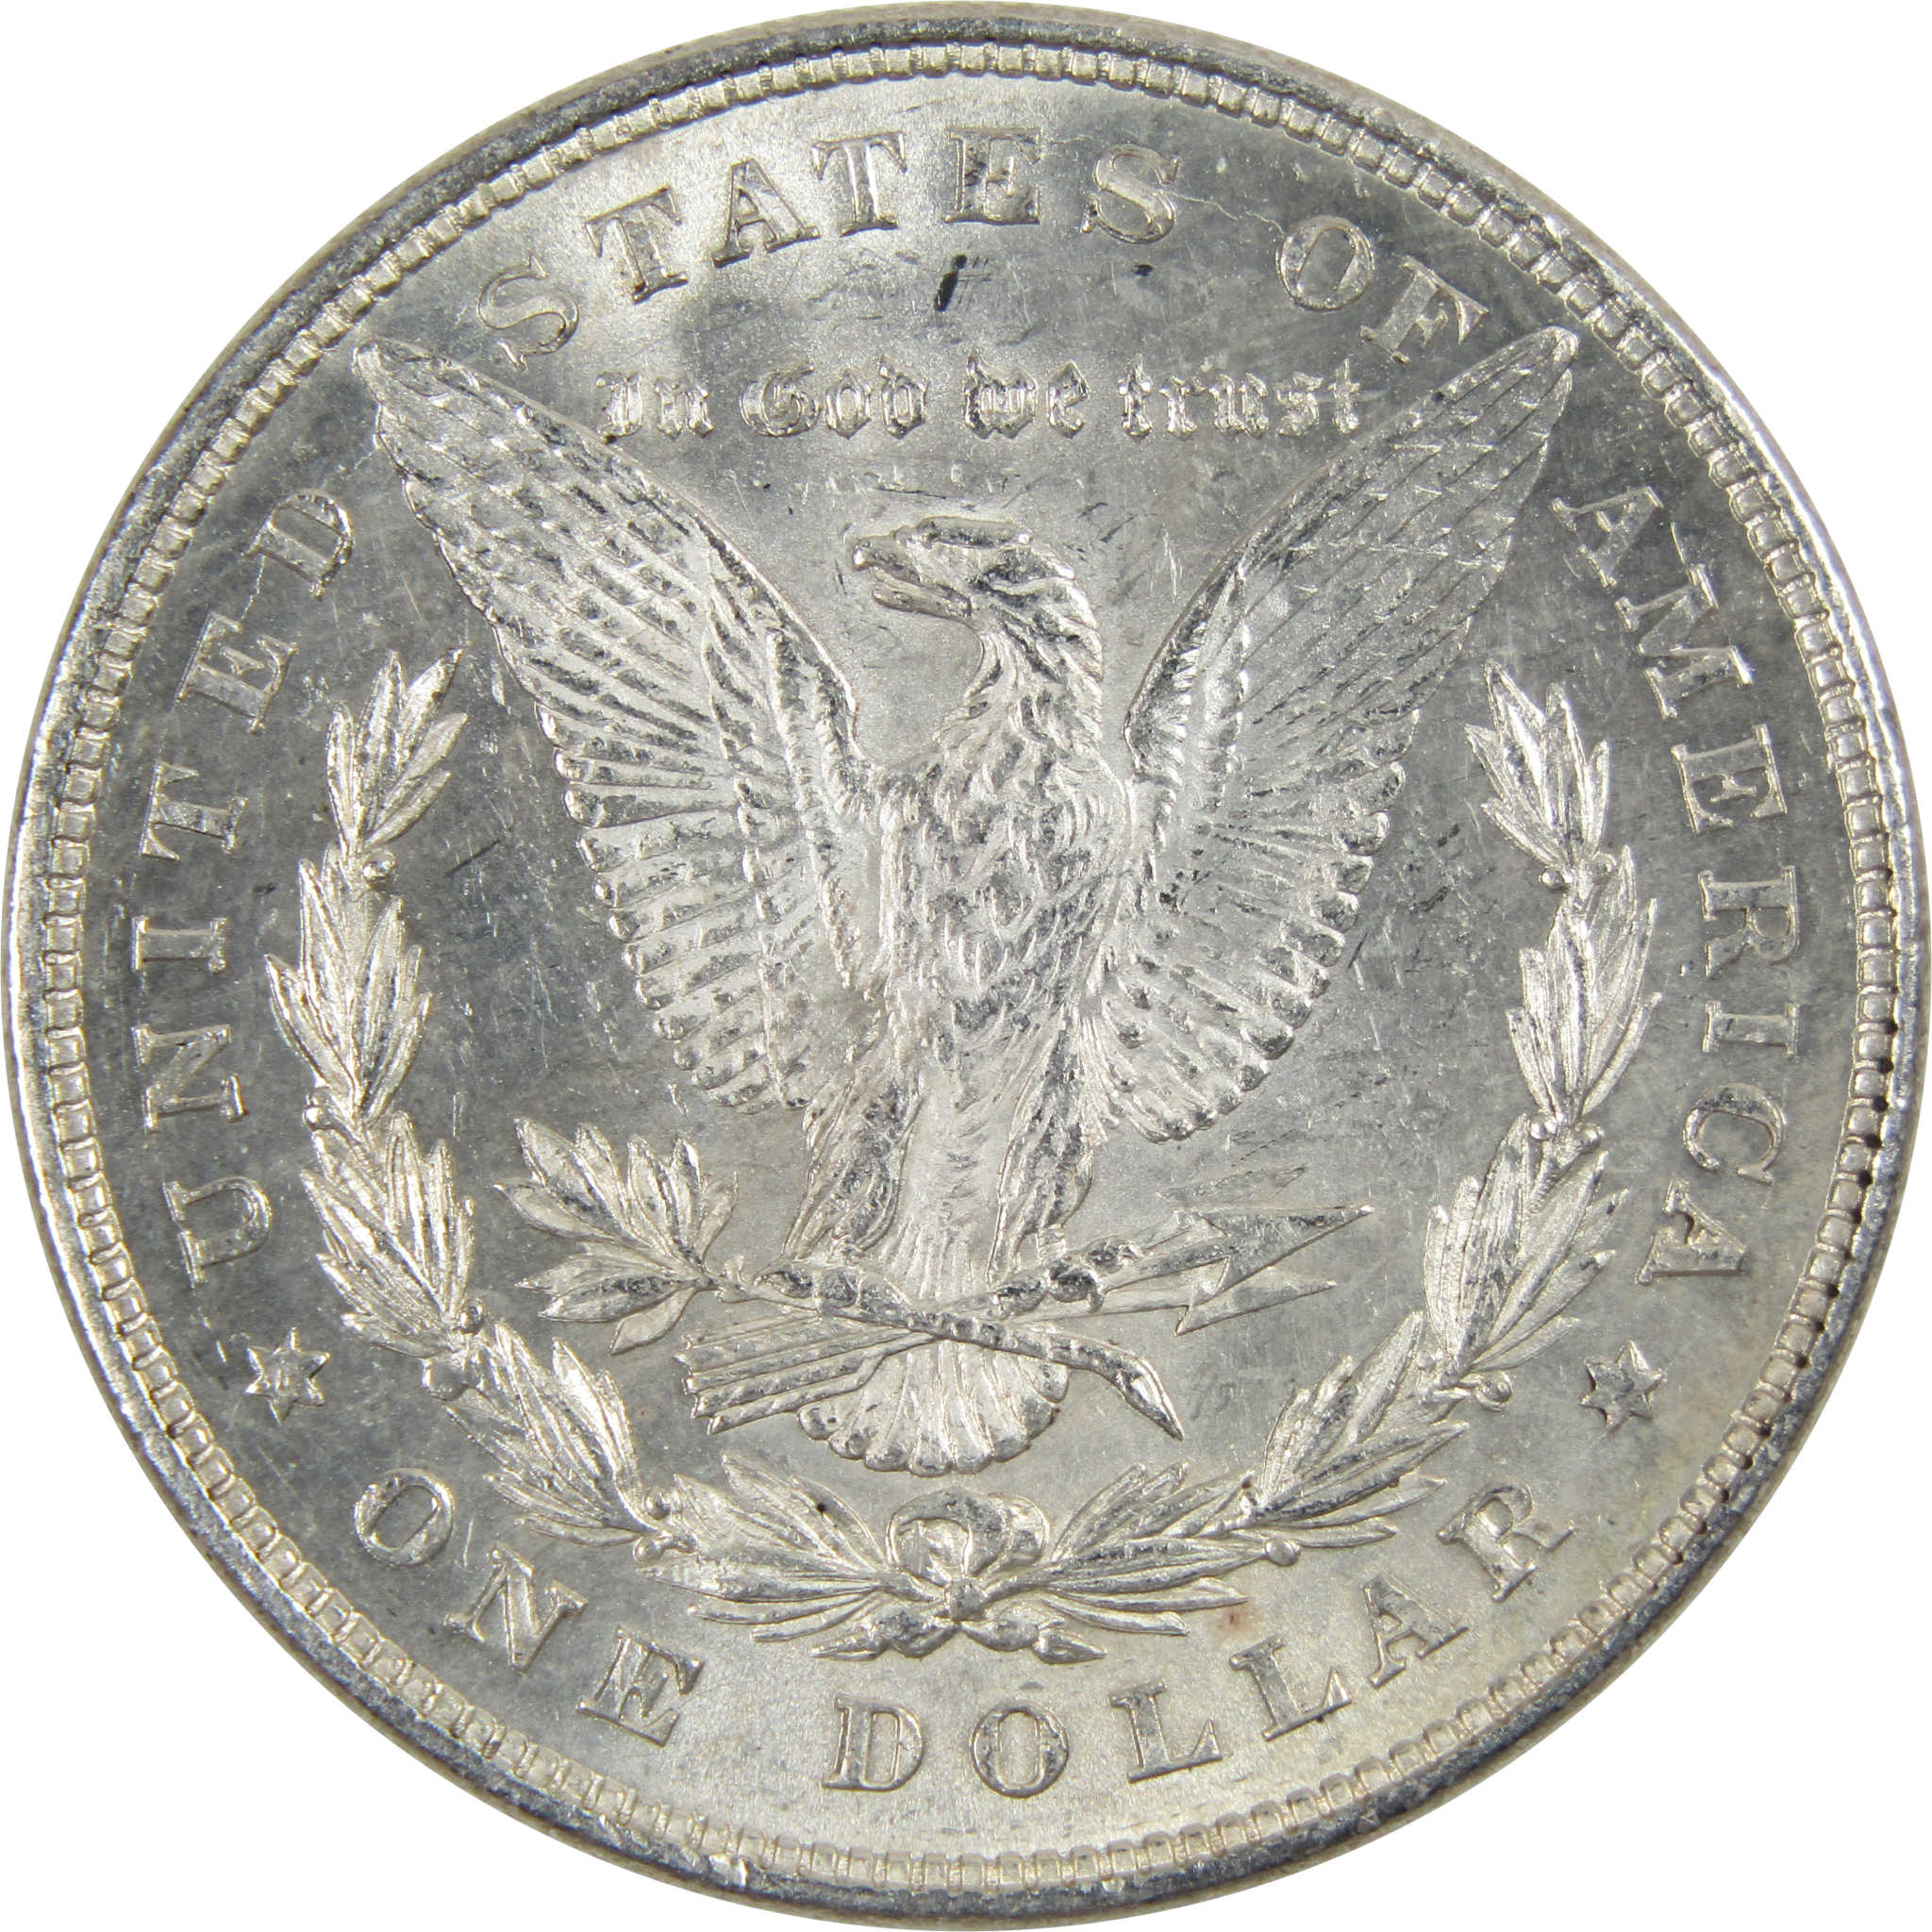 1878 8TF Morgan Dollar BU Uncirculated Mint State 90% Silver SKU:I3839 - Morgan coin - Morgan silver dollar - Morgan silver dollar for sale - Profile Coins &amp; Collectibles